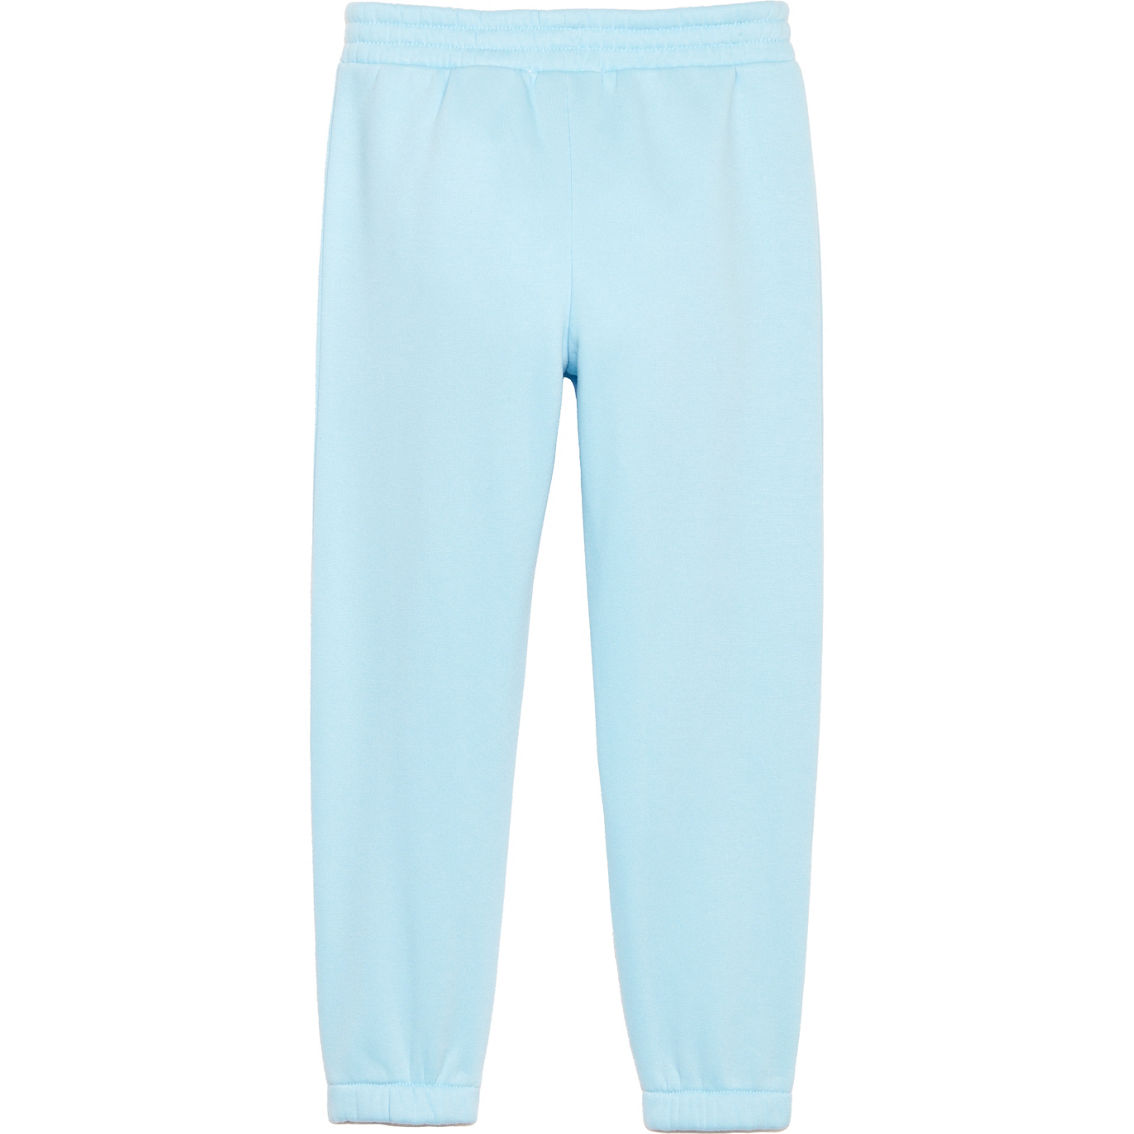 Pony Tails Girls Fleece Joggers | Girls 7-16 | Clothing & Accessories ...